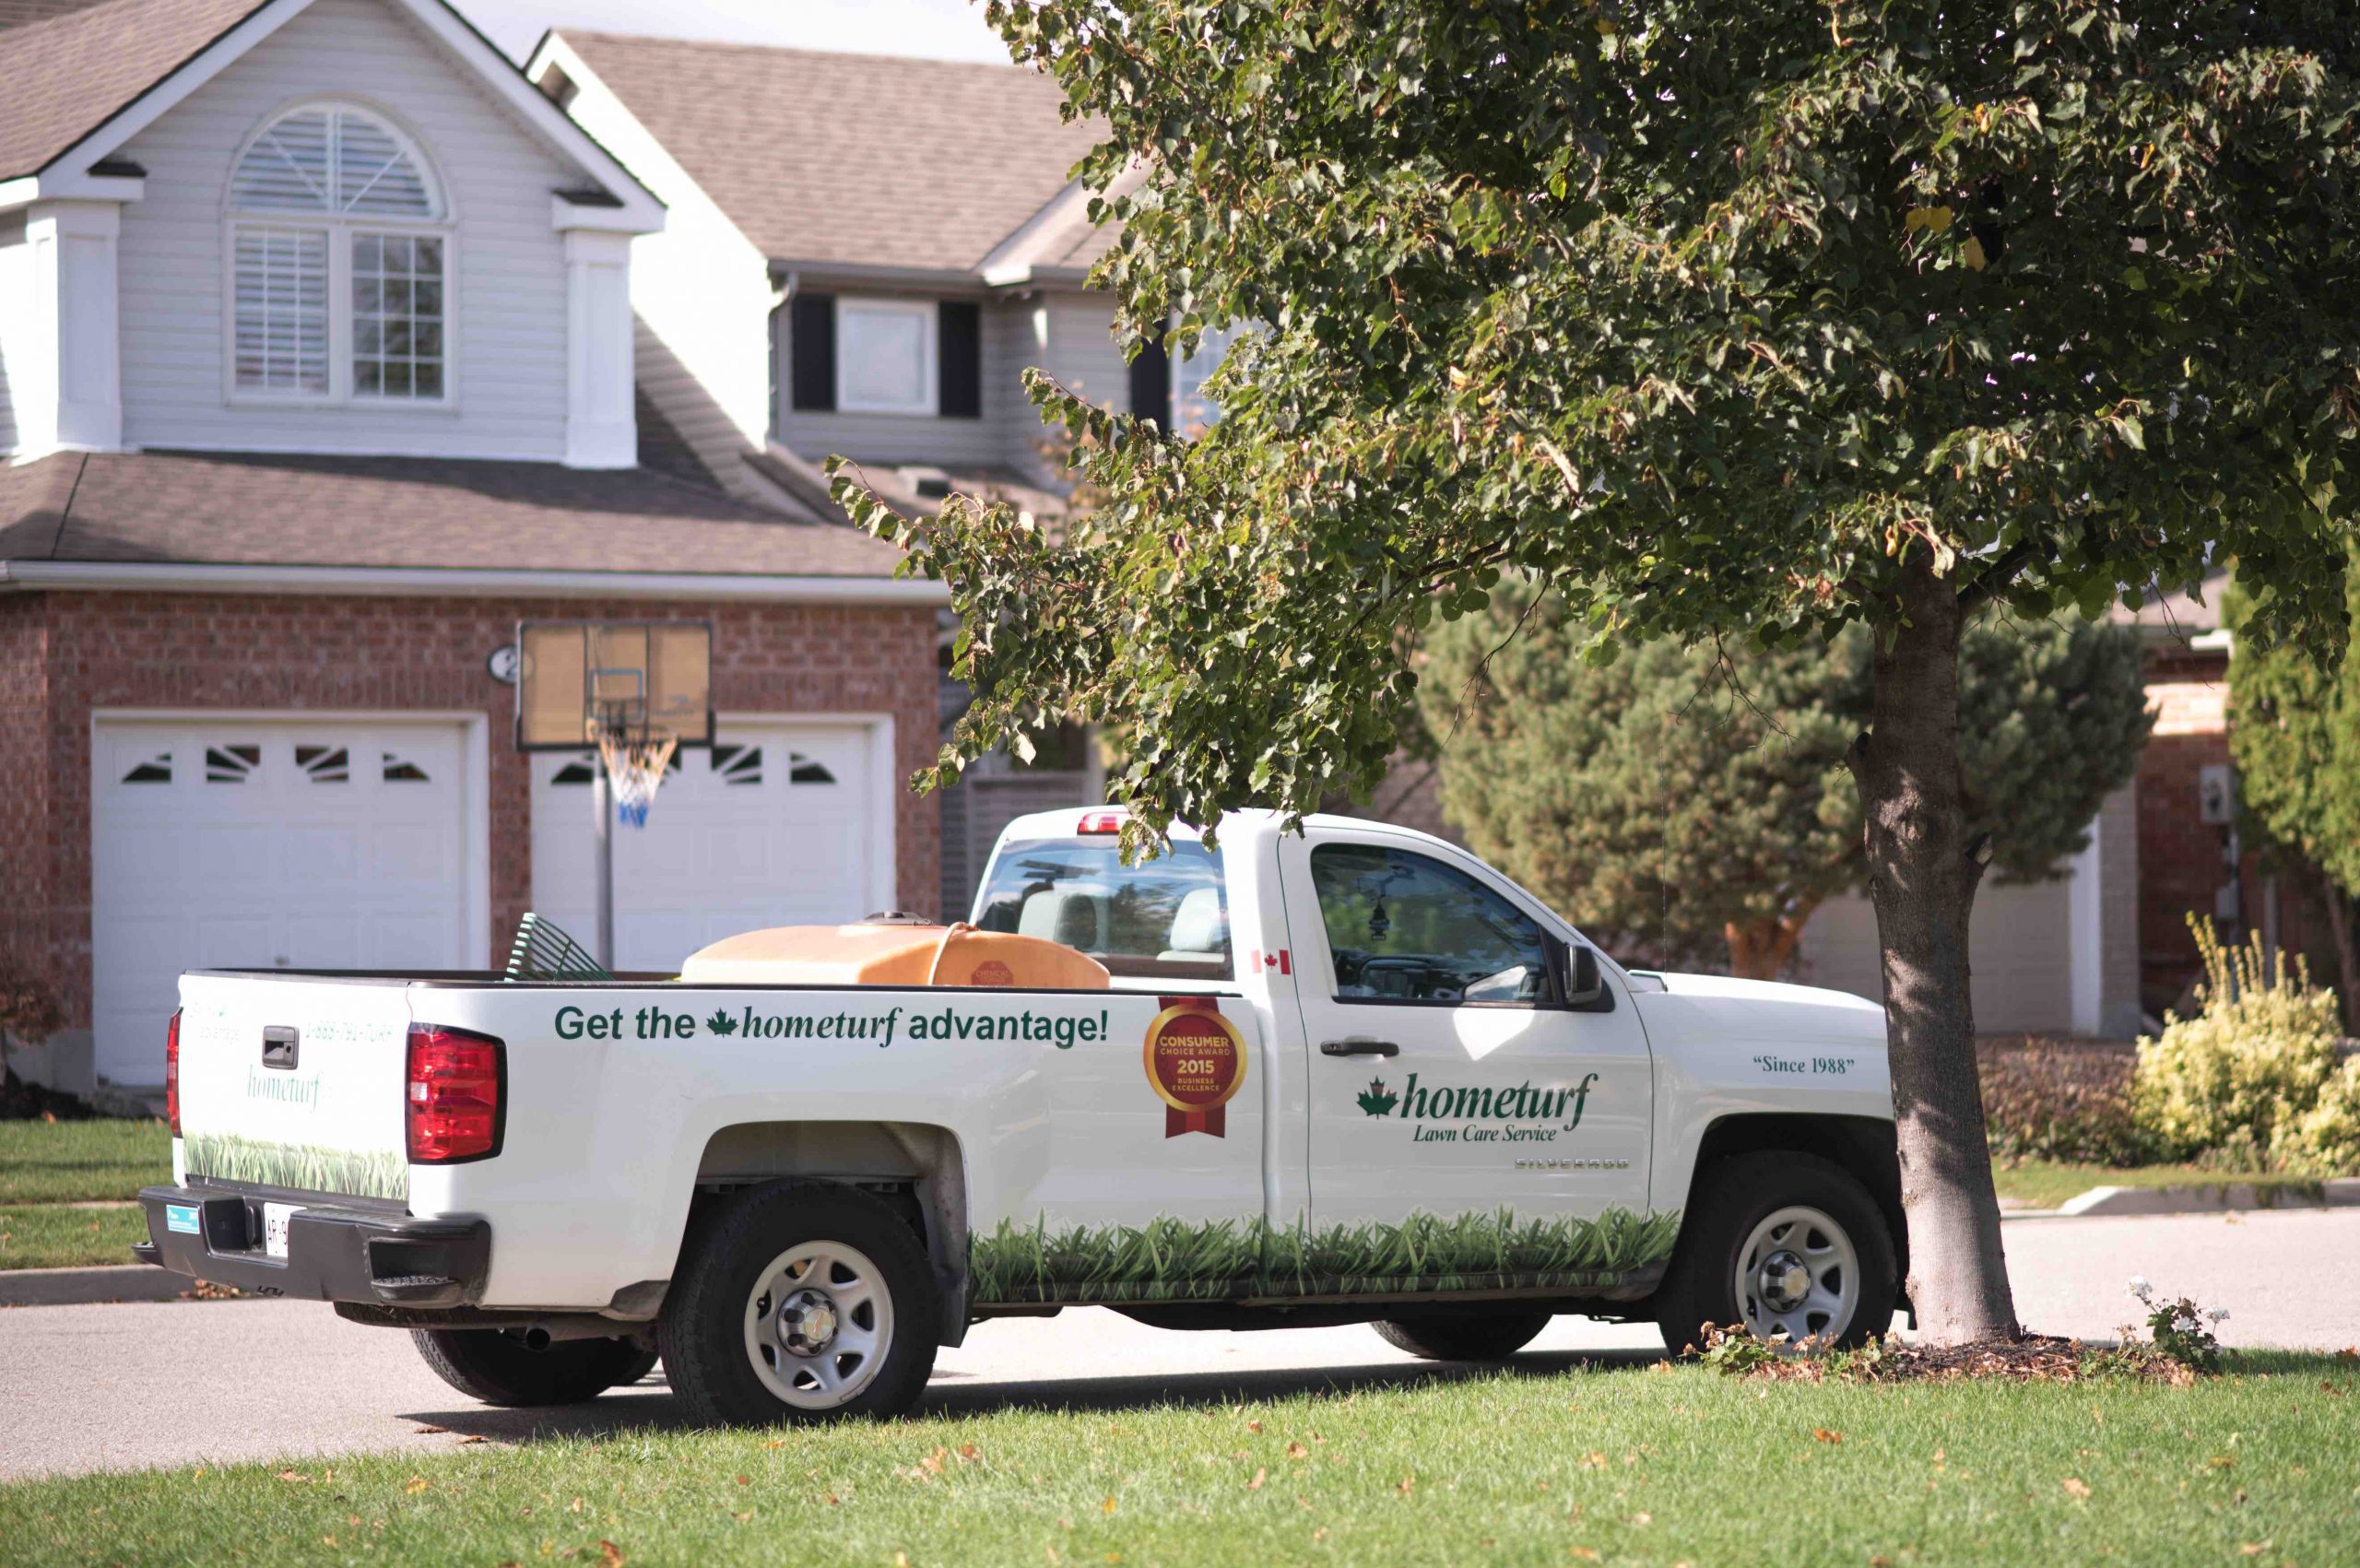 Hometurf lawn care truck parked outside a customer's property.